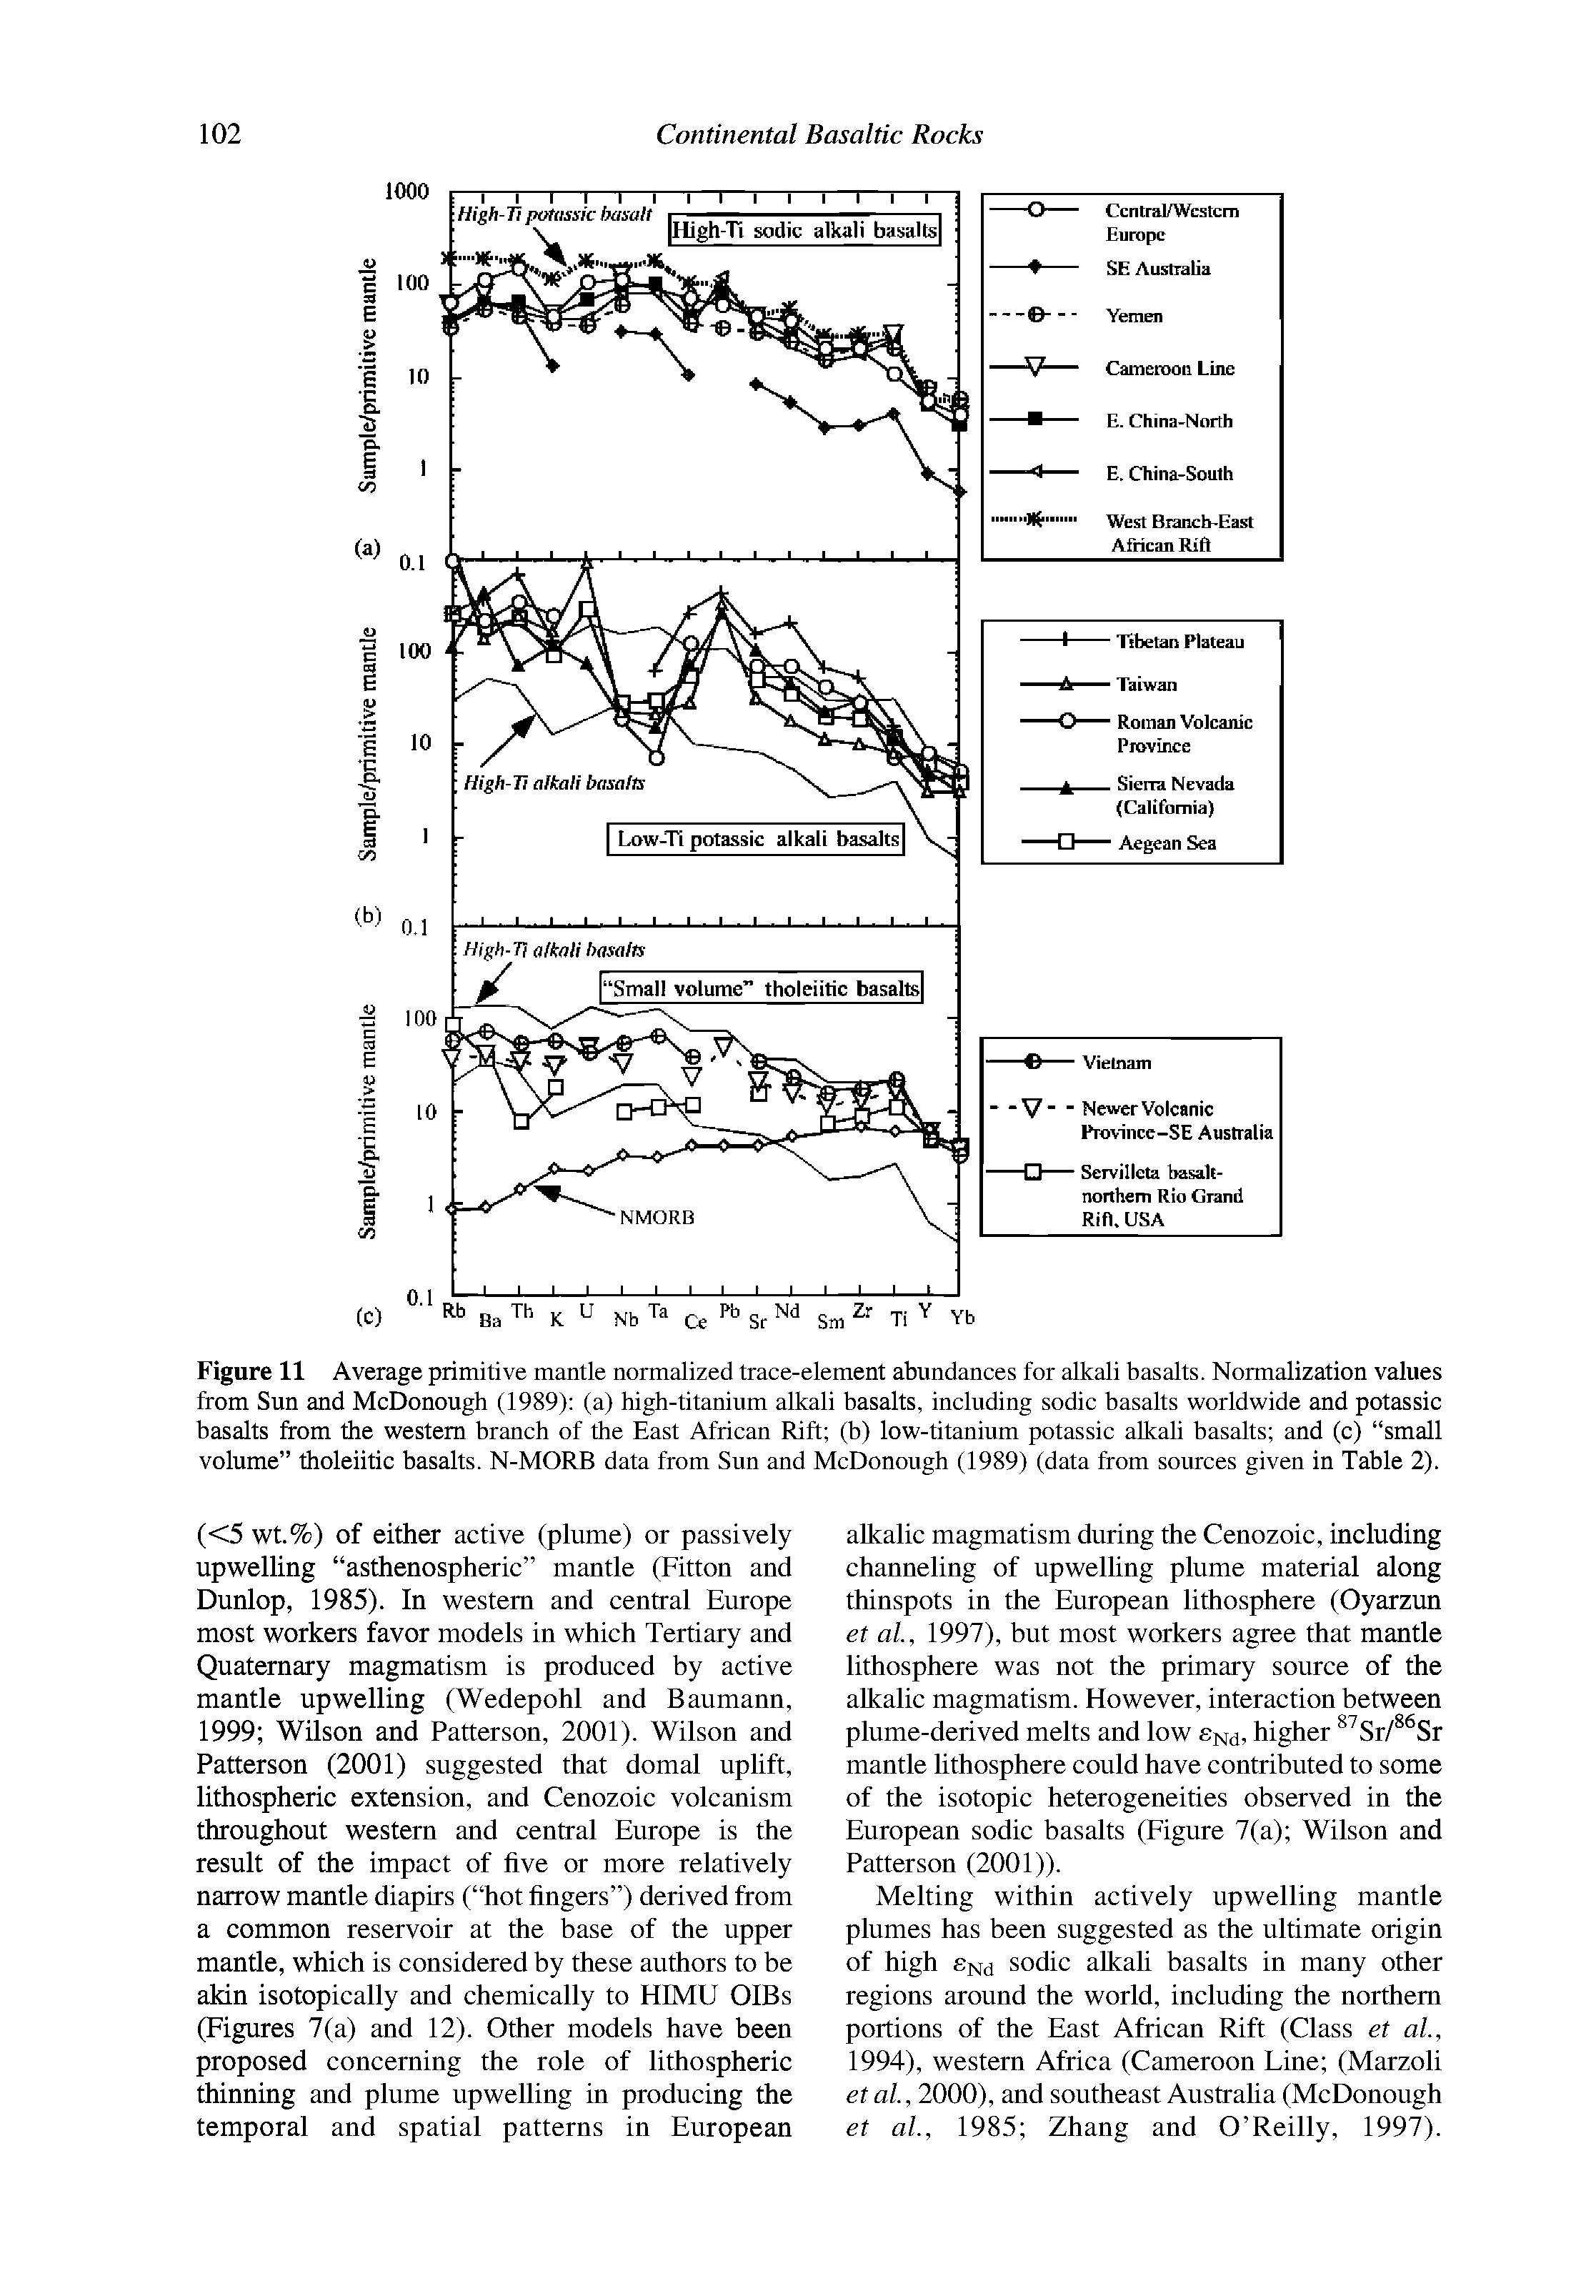 Figure 11 Average primitive mantle normalized trace-element abundances for alkali basalts. Normalization values from Sun and McDonough (1989) (a) high-titanium alkali basalts, including sodic basalts worldwide and potassic basalts from the western branch of the East African Rift (b) low-titanium potassic alkali basalts and (c) small volume tholeiitic basalts. N-MORB data from Sun and McDonough (1989) (data from sources given in Table 2).